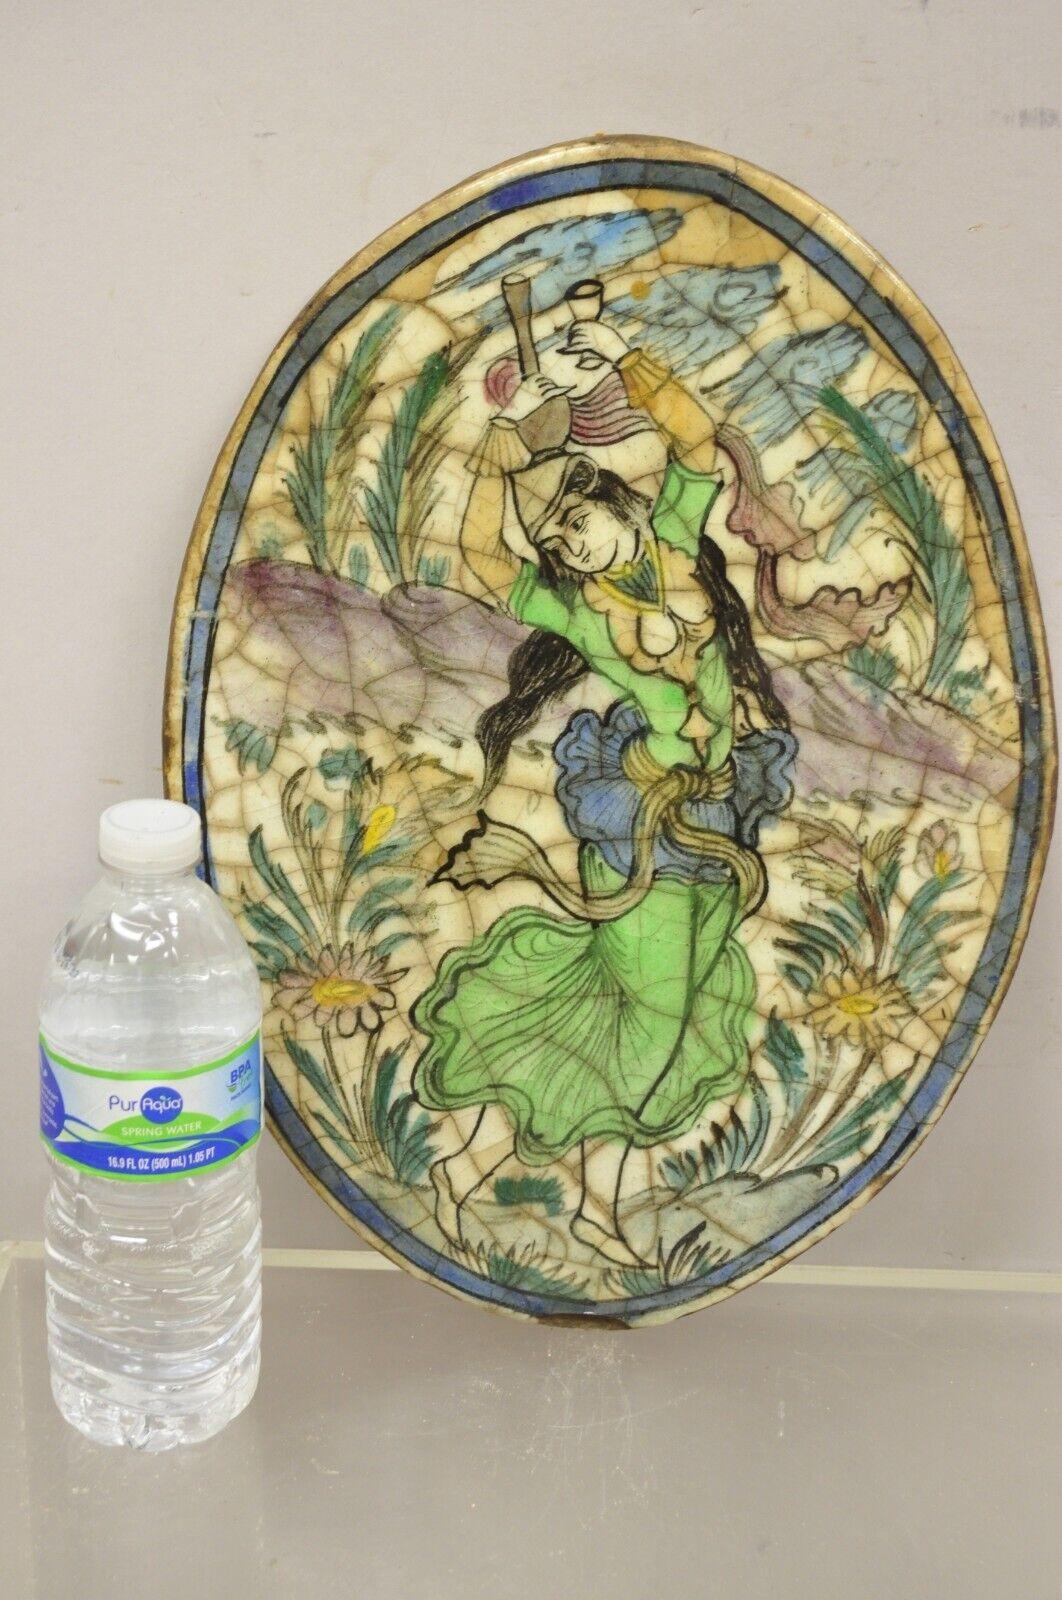 Antique Persian Iznik Qajar style ceramic pottery oval tile green lady dancer C3. Item features an original crackle glazed finish, heavy ceramic pottery construction, very impressive detail, wonderful style and form. Great to mount as wall art or